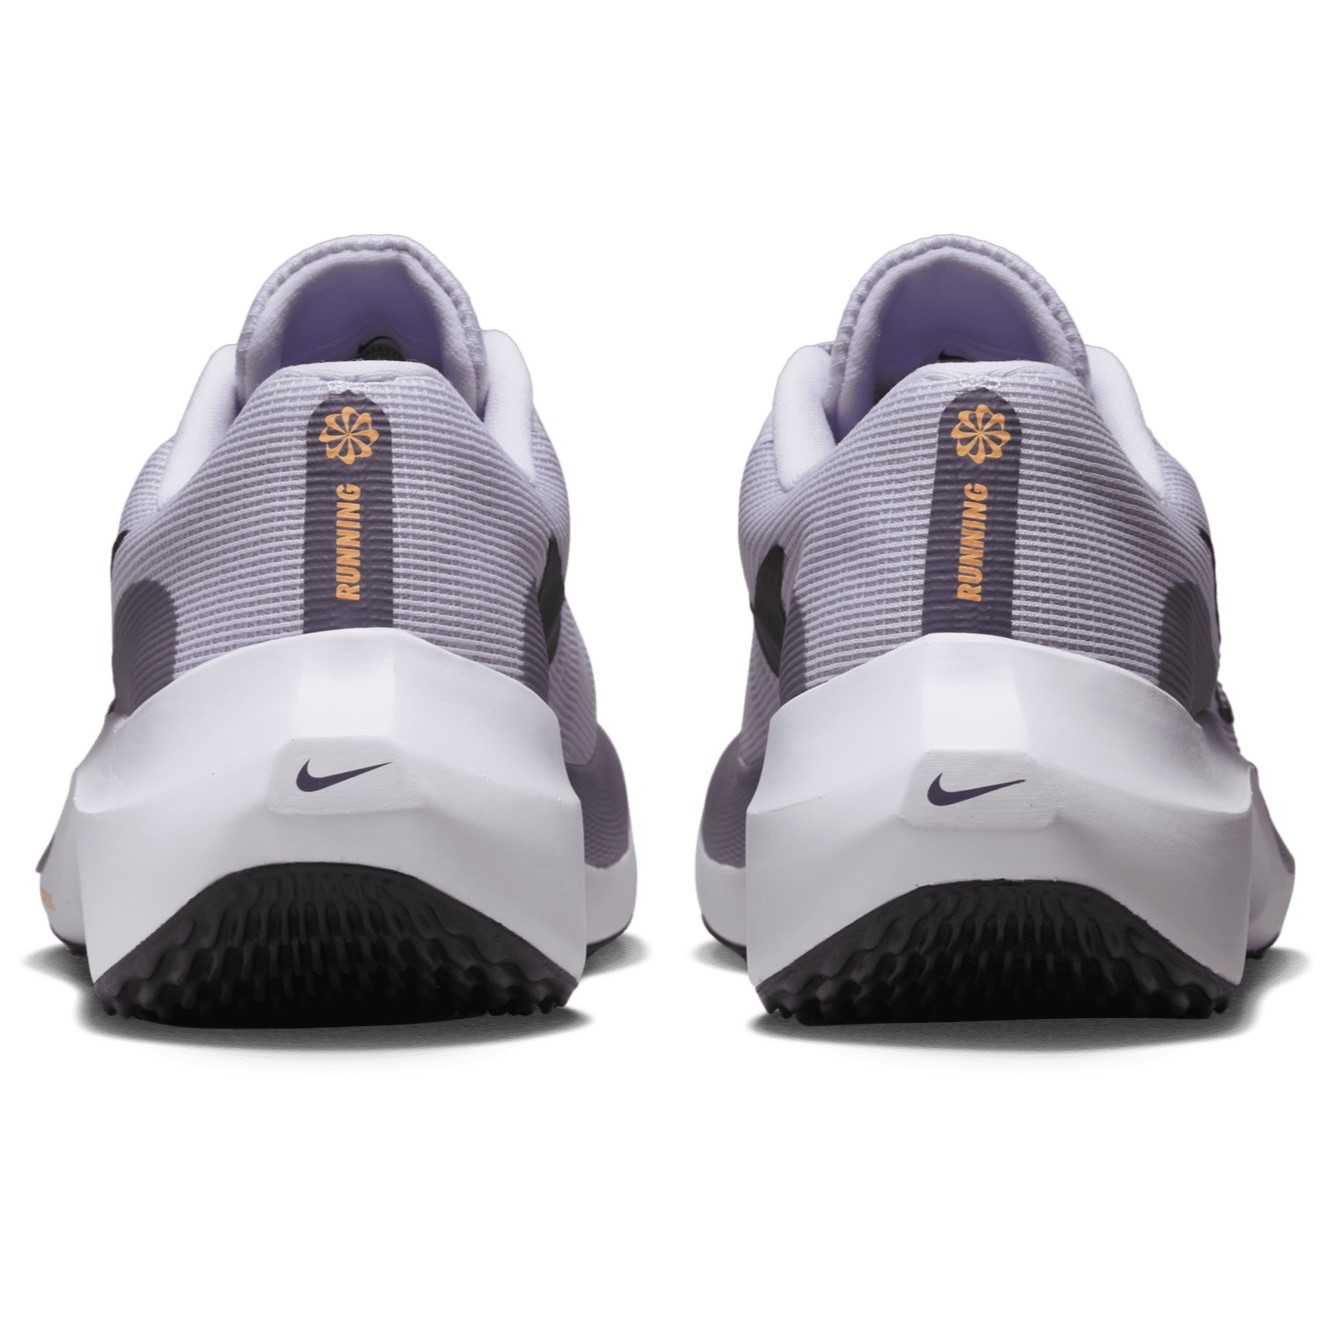 GIÀY NIKE NỮ ZOOM FLY 5 WOMEN ROAD RUNNING SHOES BARELY GRAPE DM8974-500 7